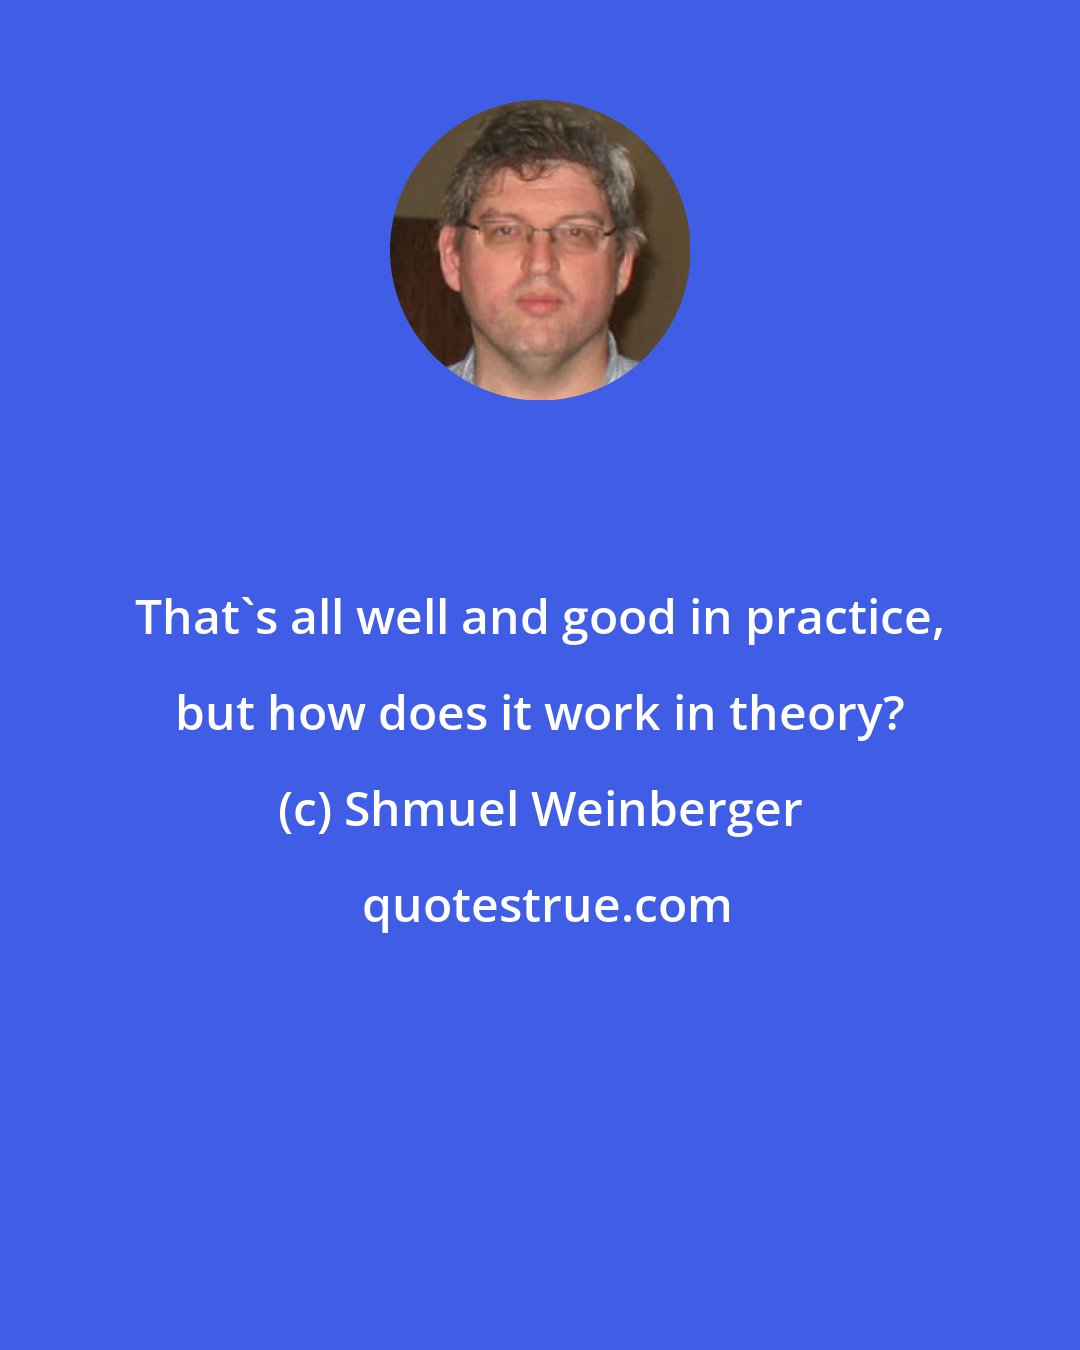 Shmuel Weinberger: That's all well and good in practice, but how does it work in theory?